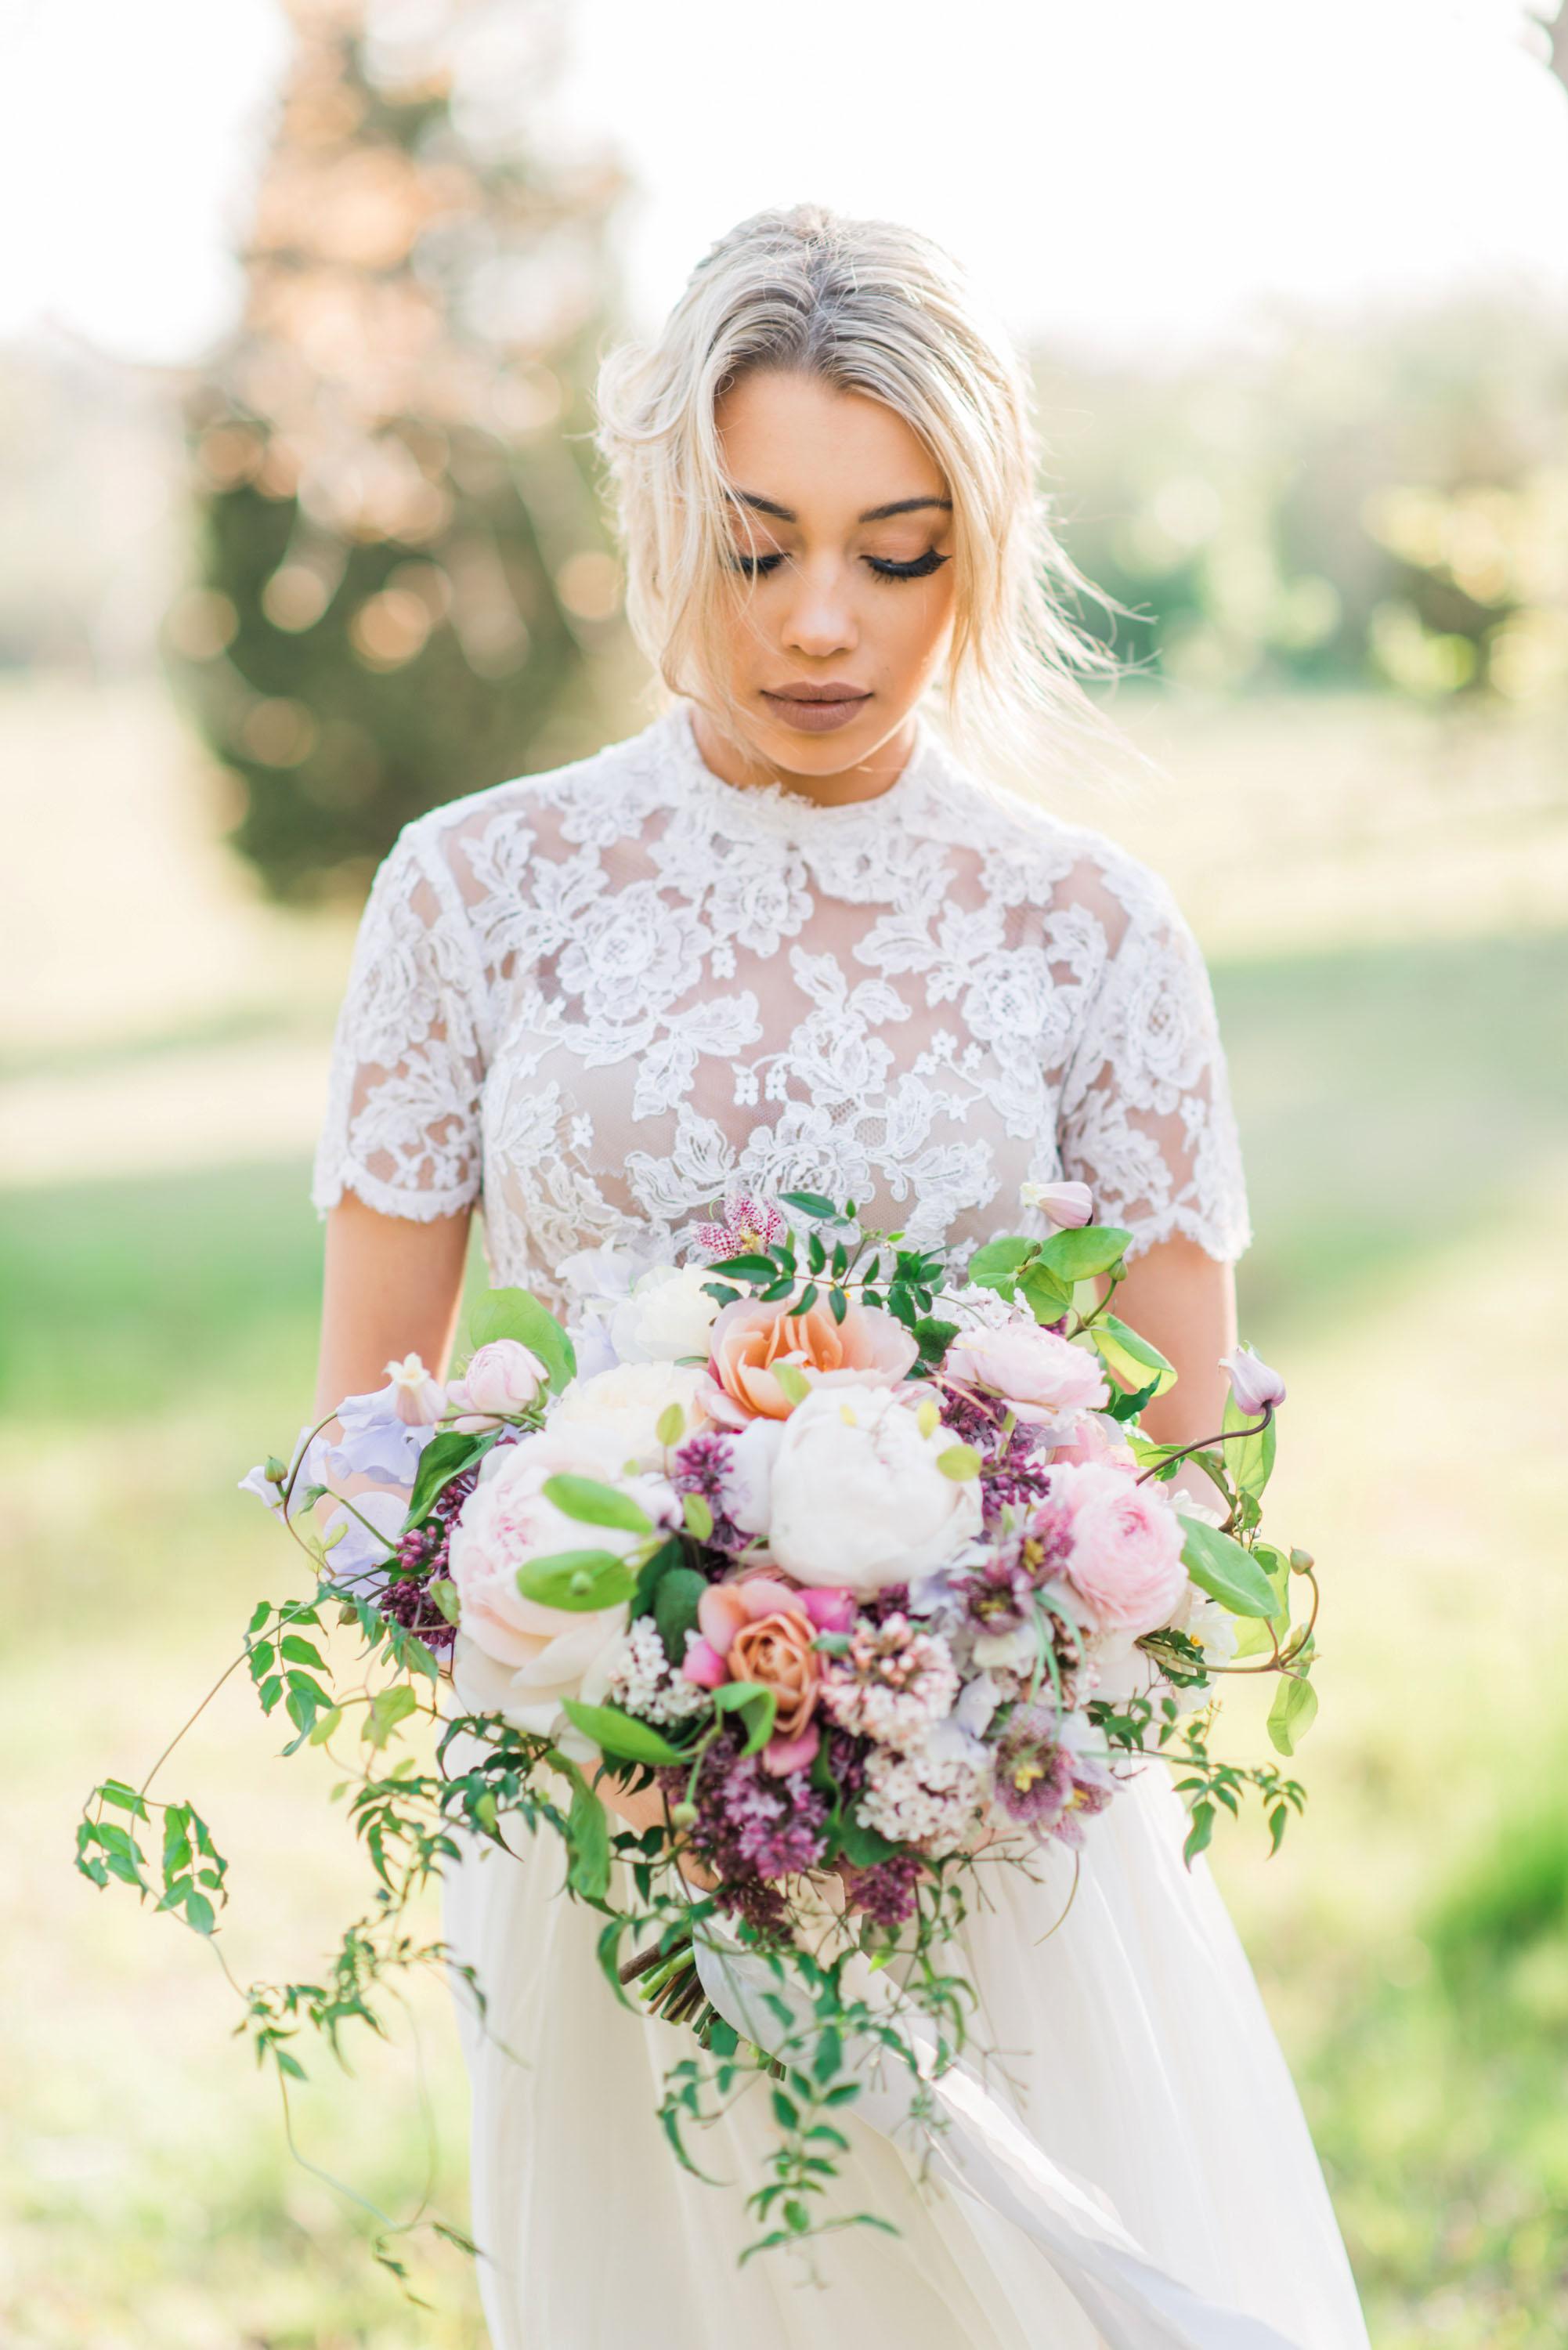 Whimsical Spring Shoot Filled with Flowers!